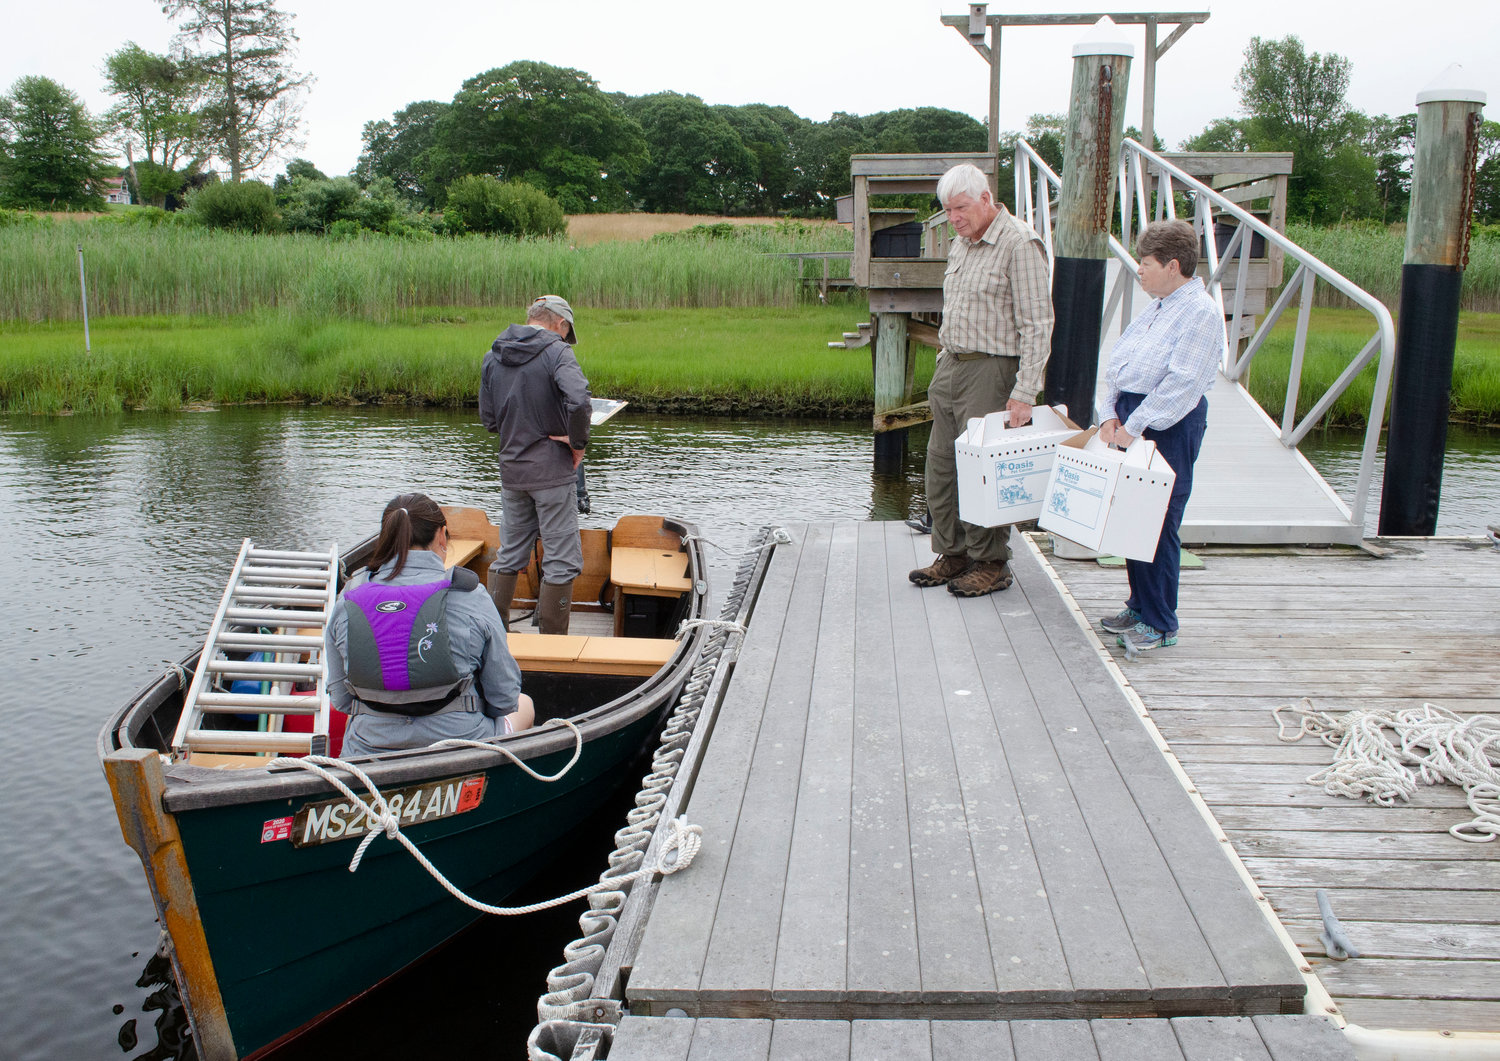 At the dock, Dr. Alan Poole (left) and Tih-Fen Ting ready the boat and look for the location of the first osprey while volunteers Judy and Harold Isaksen look on with the cardboard osprey boxes.